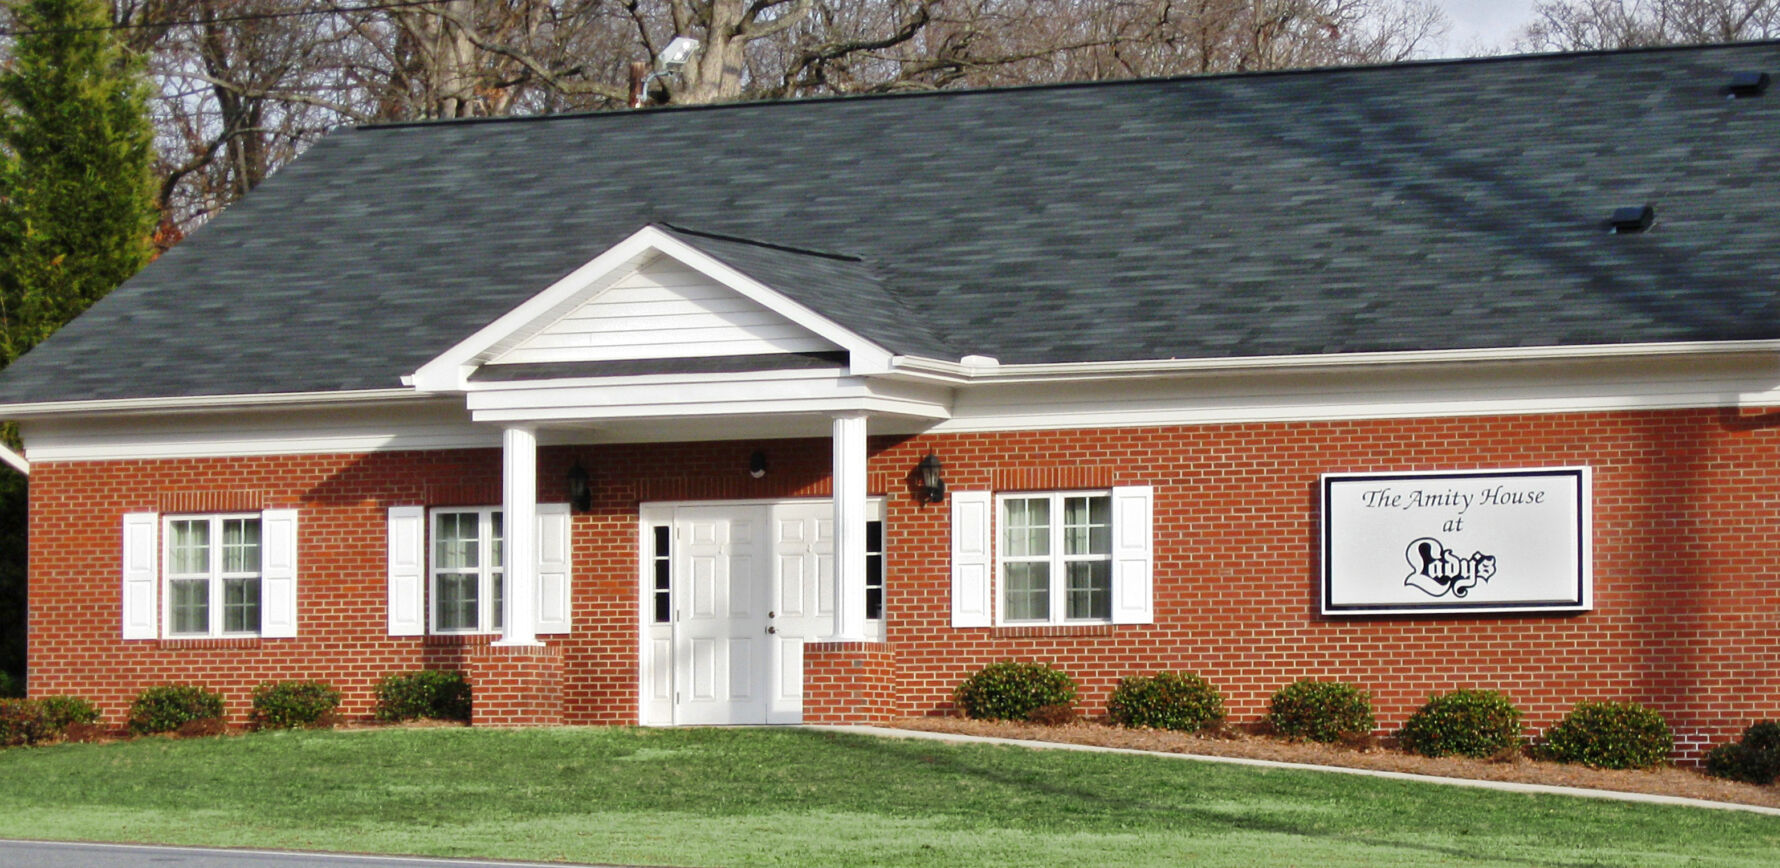 Lady's Funeral Home in Kannapolis, NC featuring Brick supplied by Johnson Concrete Products